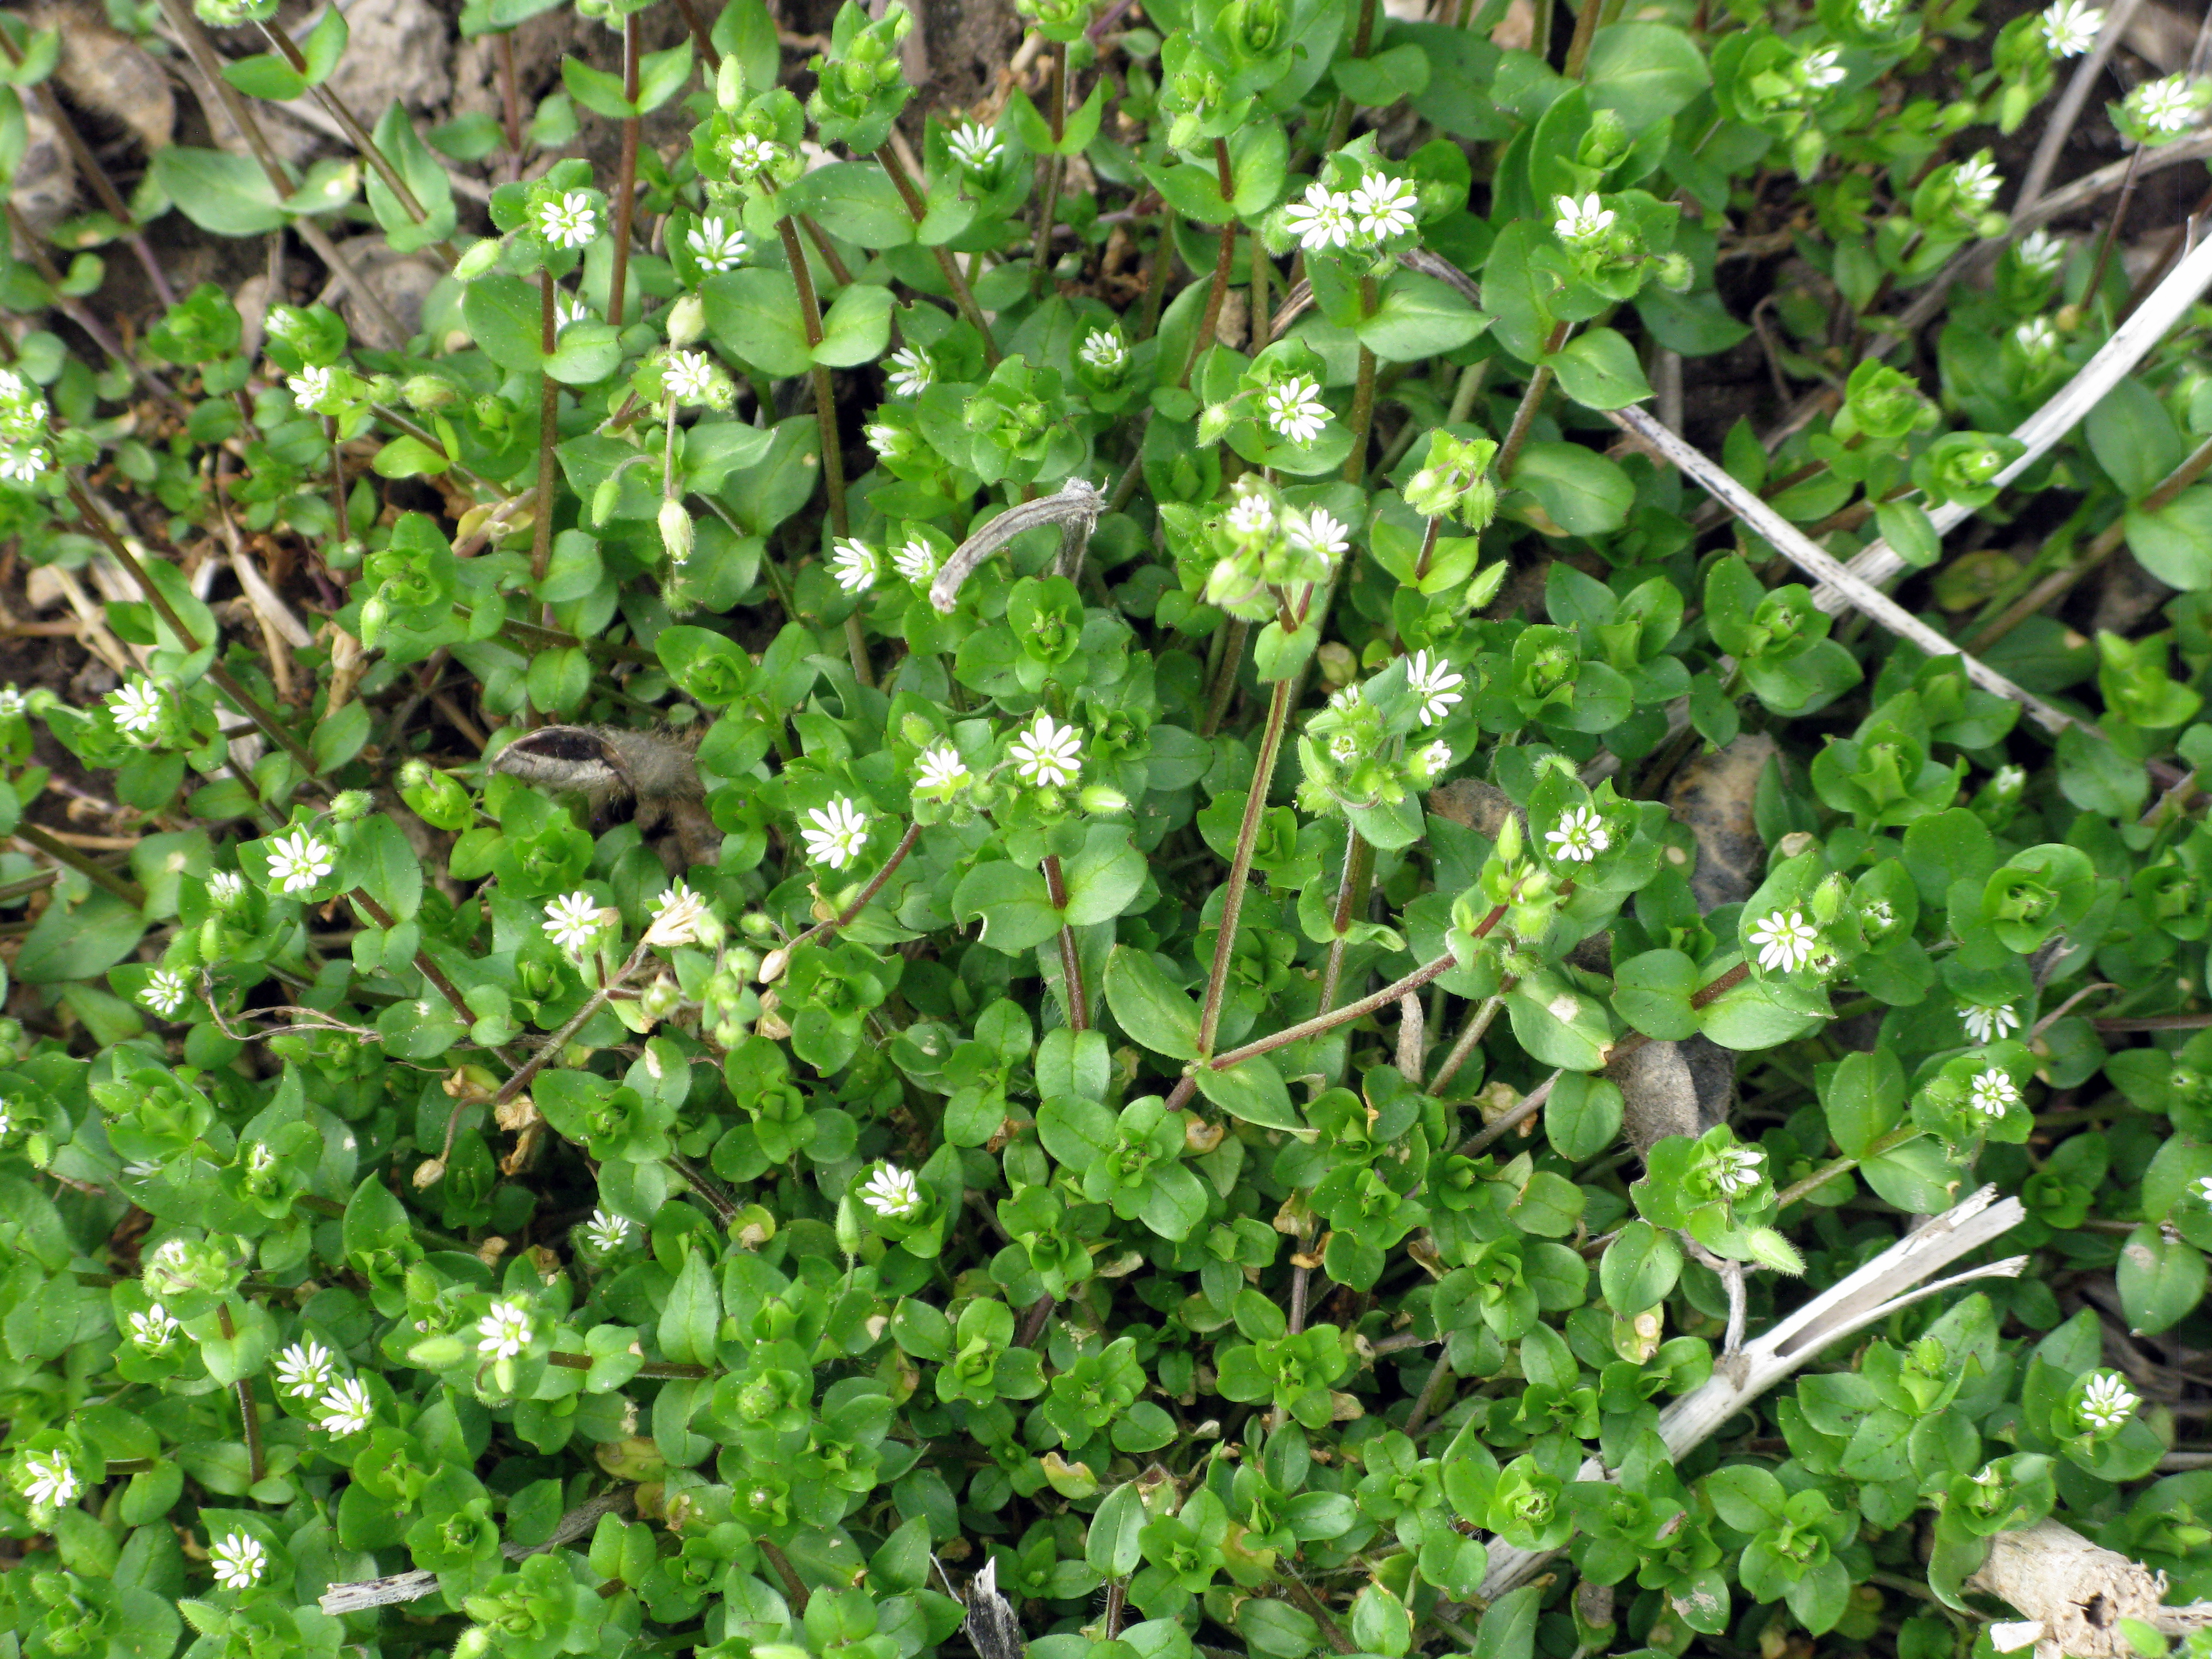 Common chickweed Cover Crop rating May 6 2015 (76)